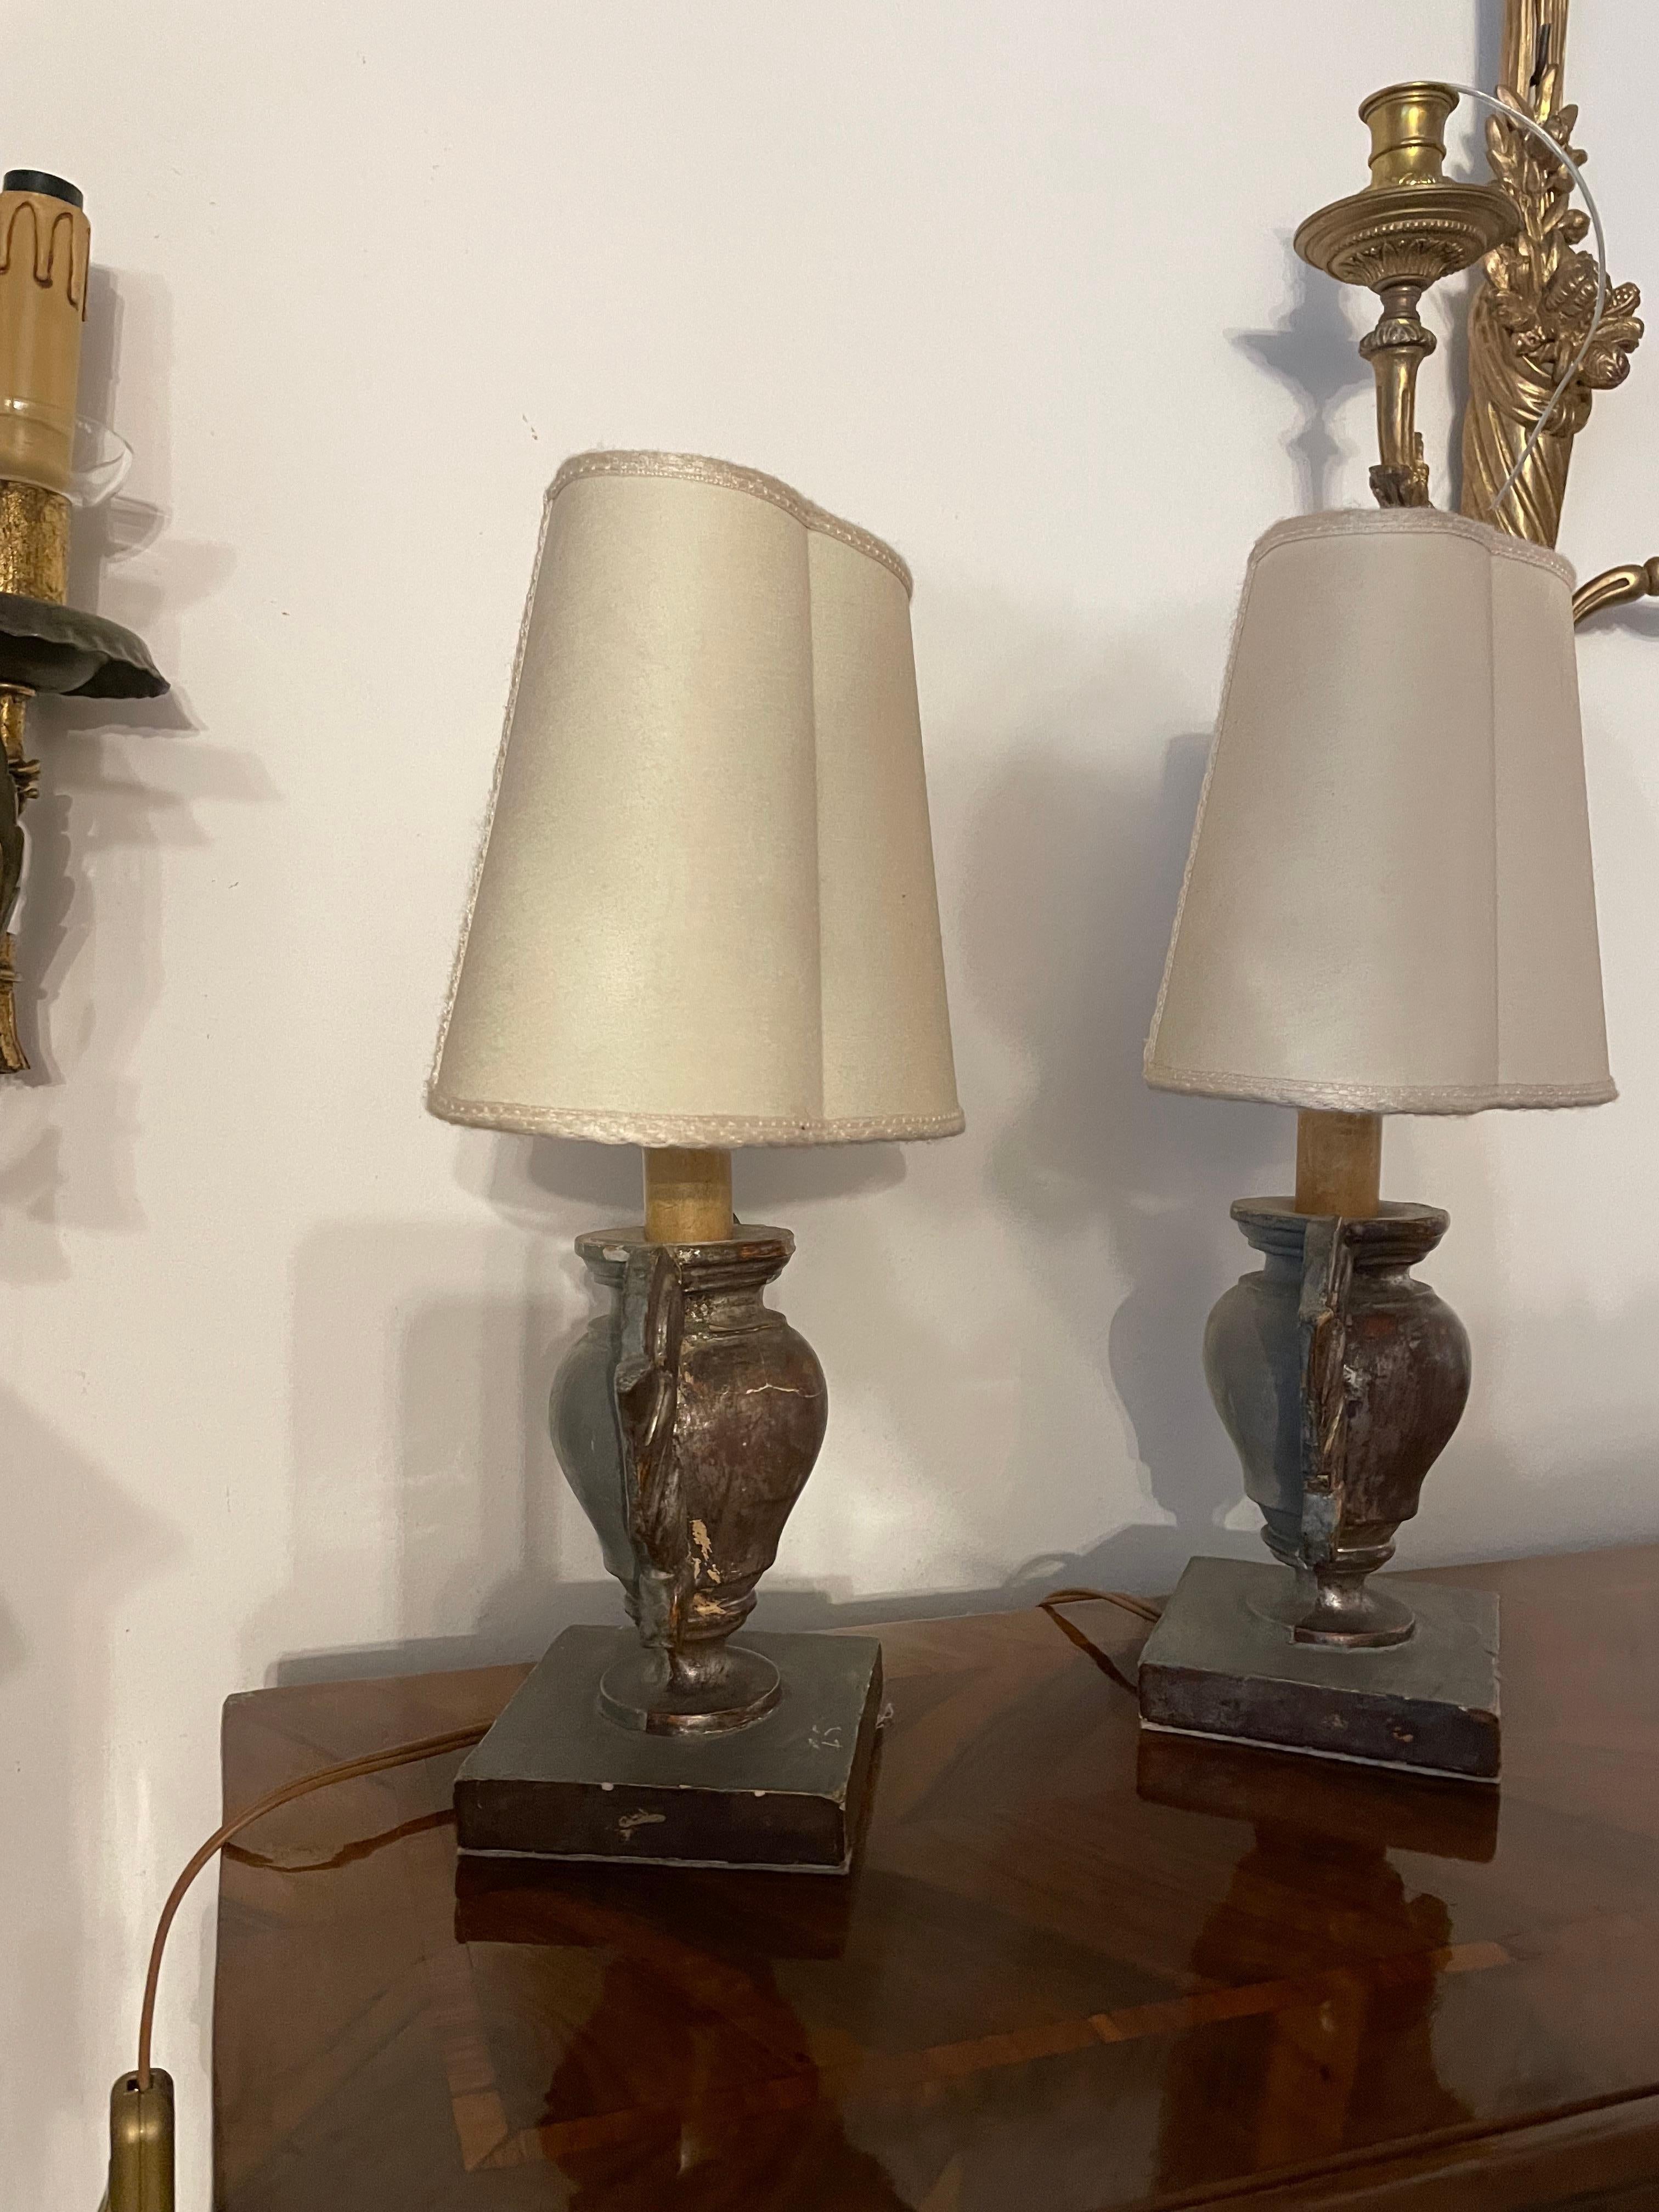 Pair of Italian Table Lamps 19th Century Pair of Dark Silver-Leaf Carved Vases 1